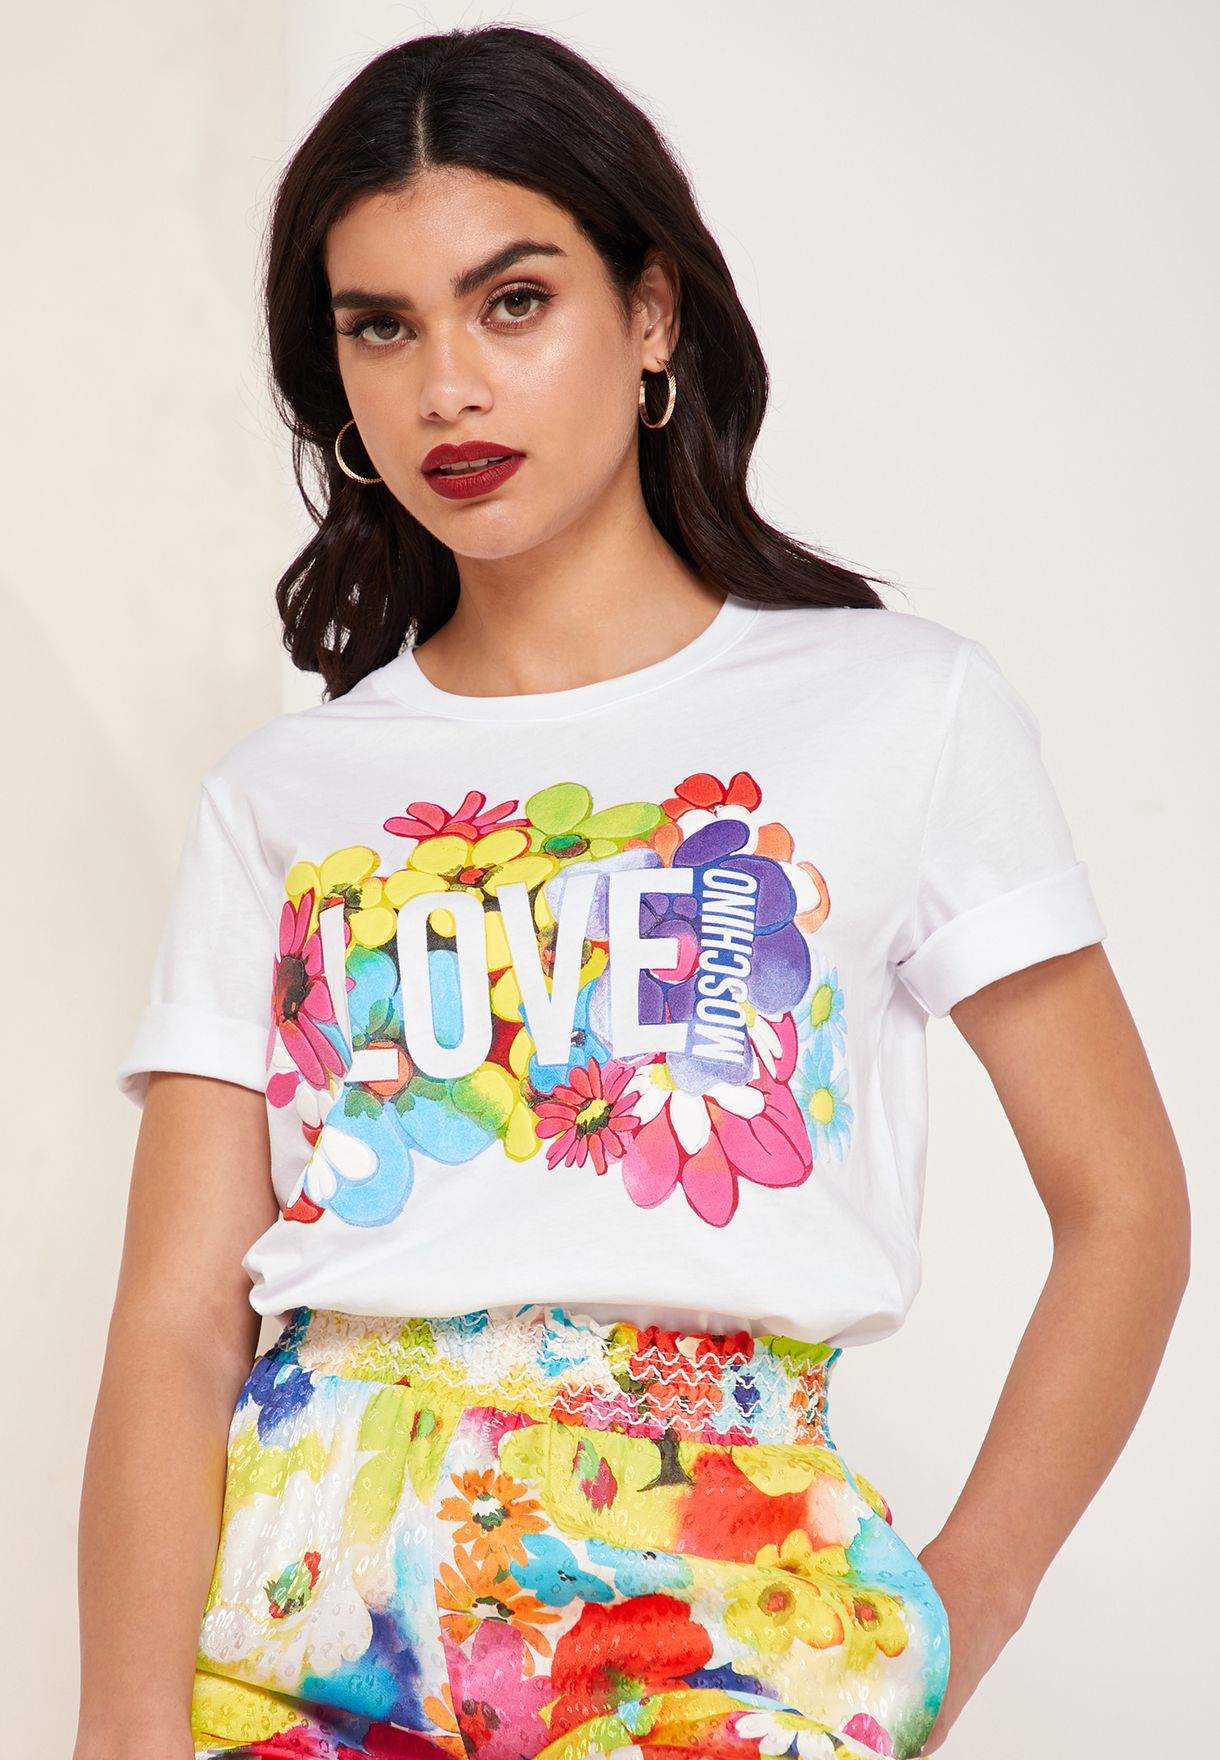 moschino floral t shirt